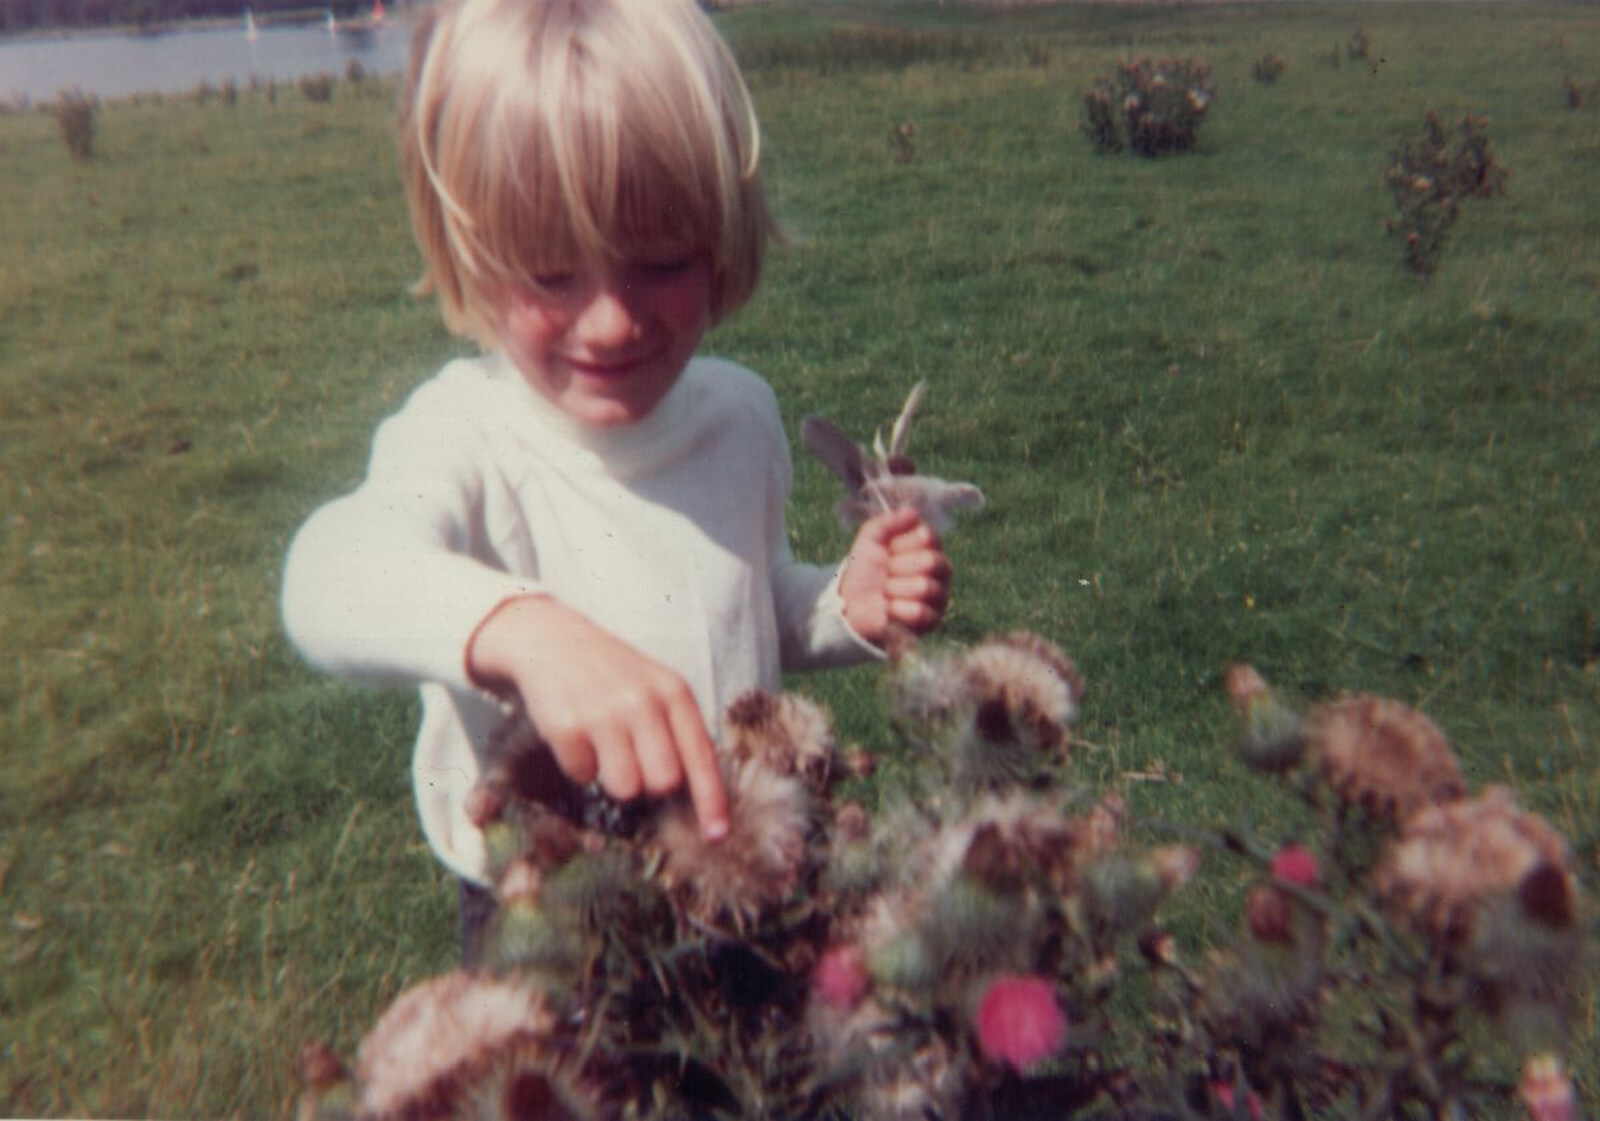 Nosher picks feathers out of thistles from Family History: The 1970s, Timperley and Sandbach, Cheshire - 24th January 2020